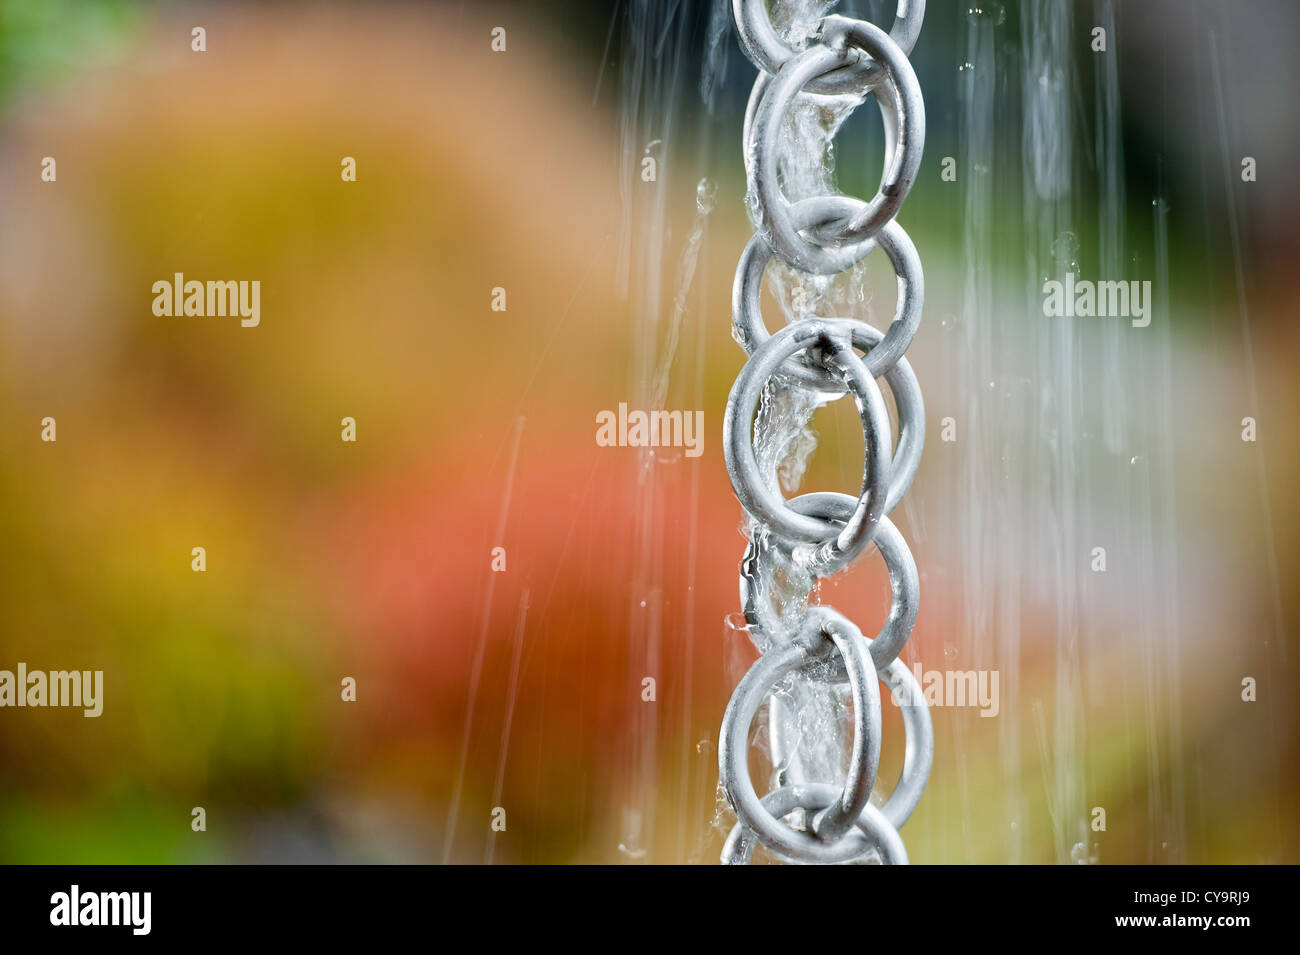 Rainwater from a household roof gushes down a rain chain during a storm.  Horizontal format, space for copy. Stock Photo